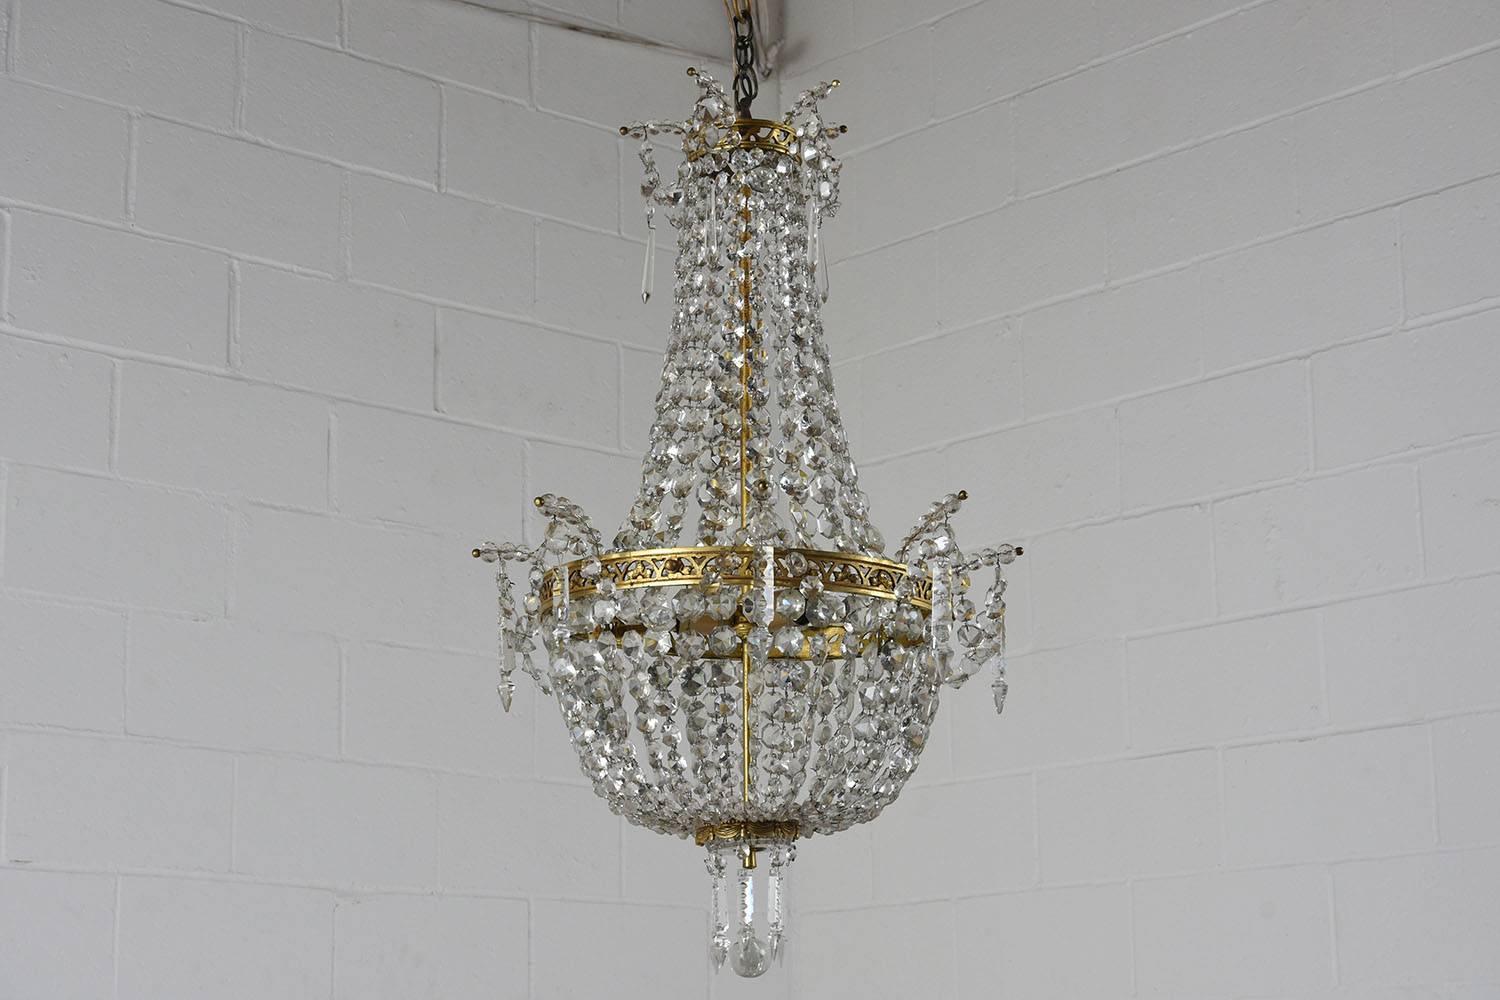 This stunning Antique Hollywood Regency Basket Chandelier is made of brass with crystal accents and the upper and center bands have leafy cut-out decorations with the bottom band is decorated with carved fabric swags and tassels. The Italian